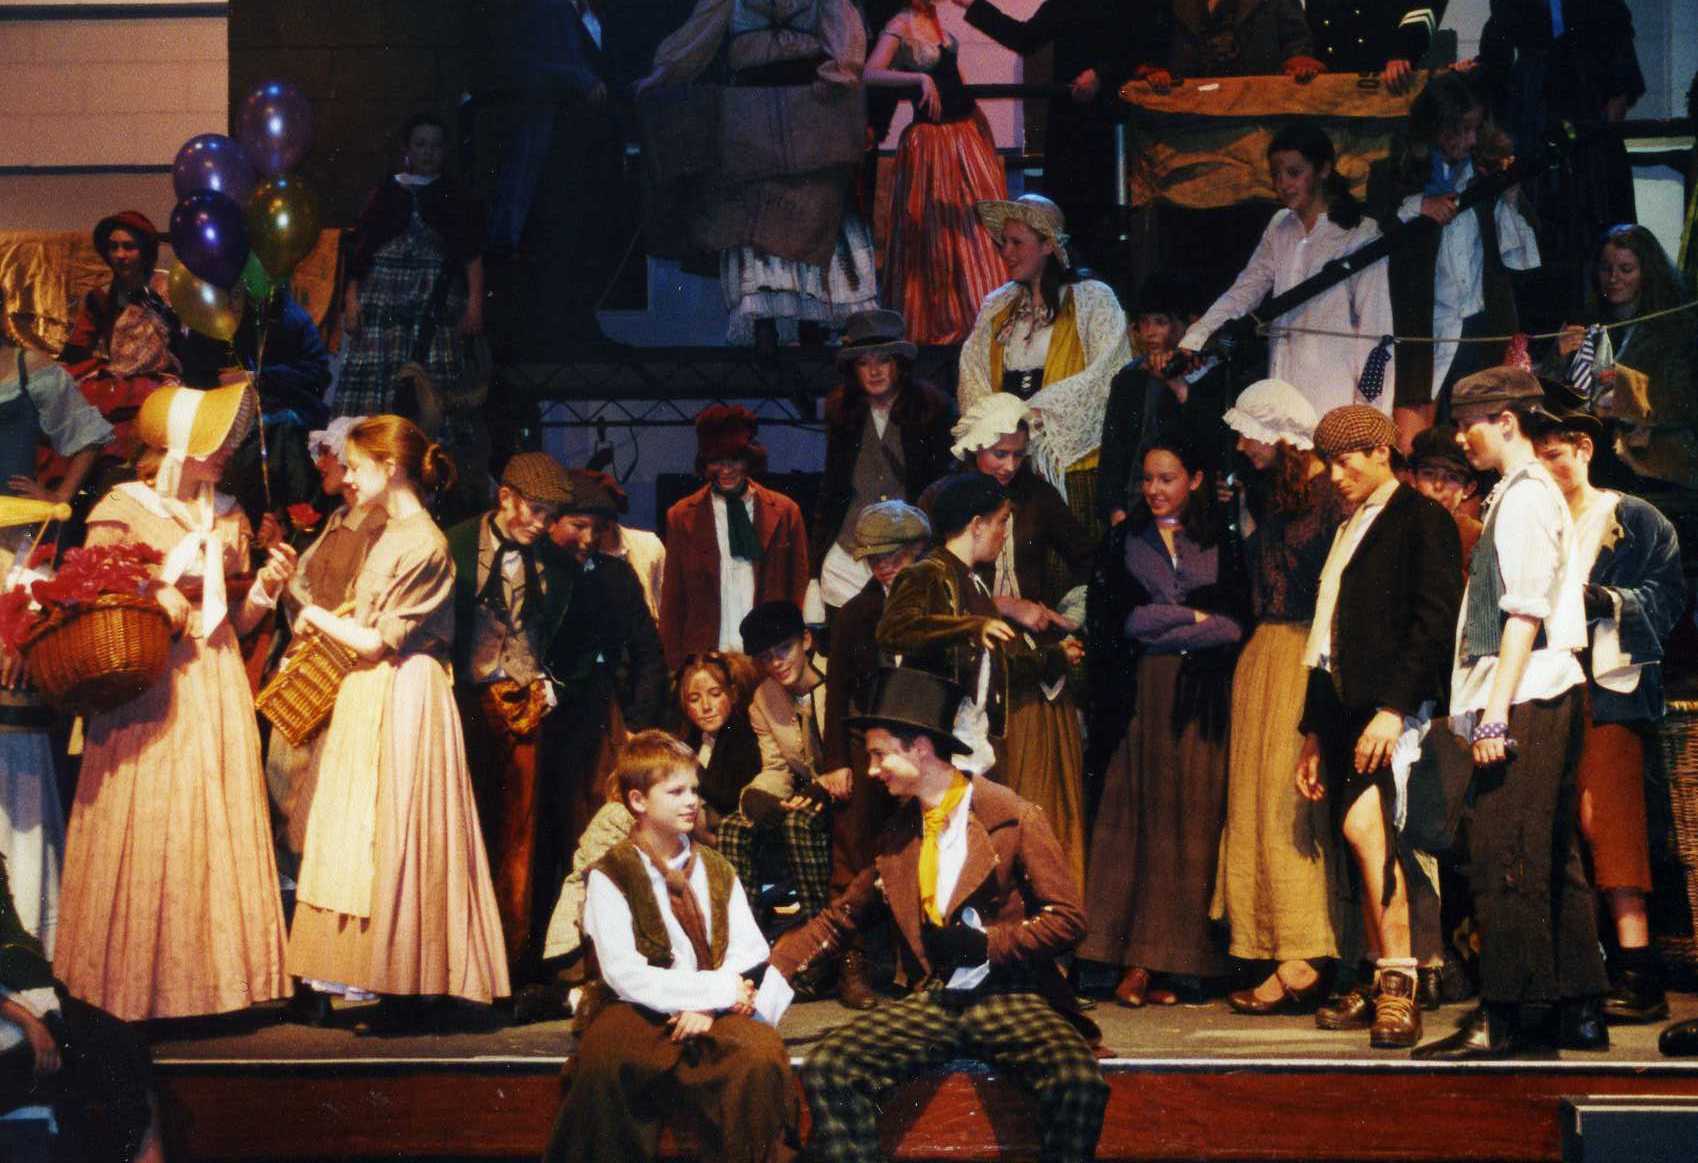 Oliver cast and crew 2001 and 1981